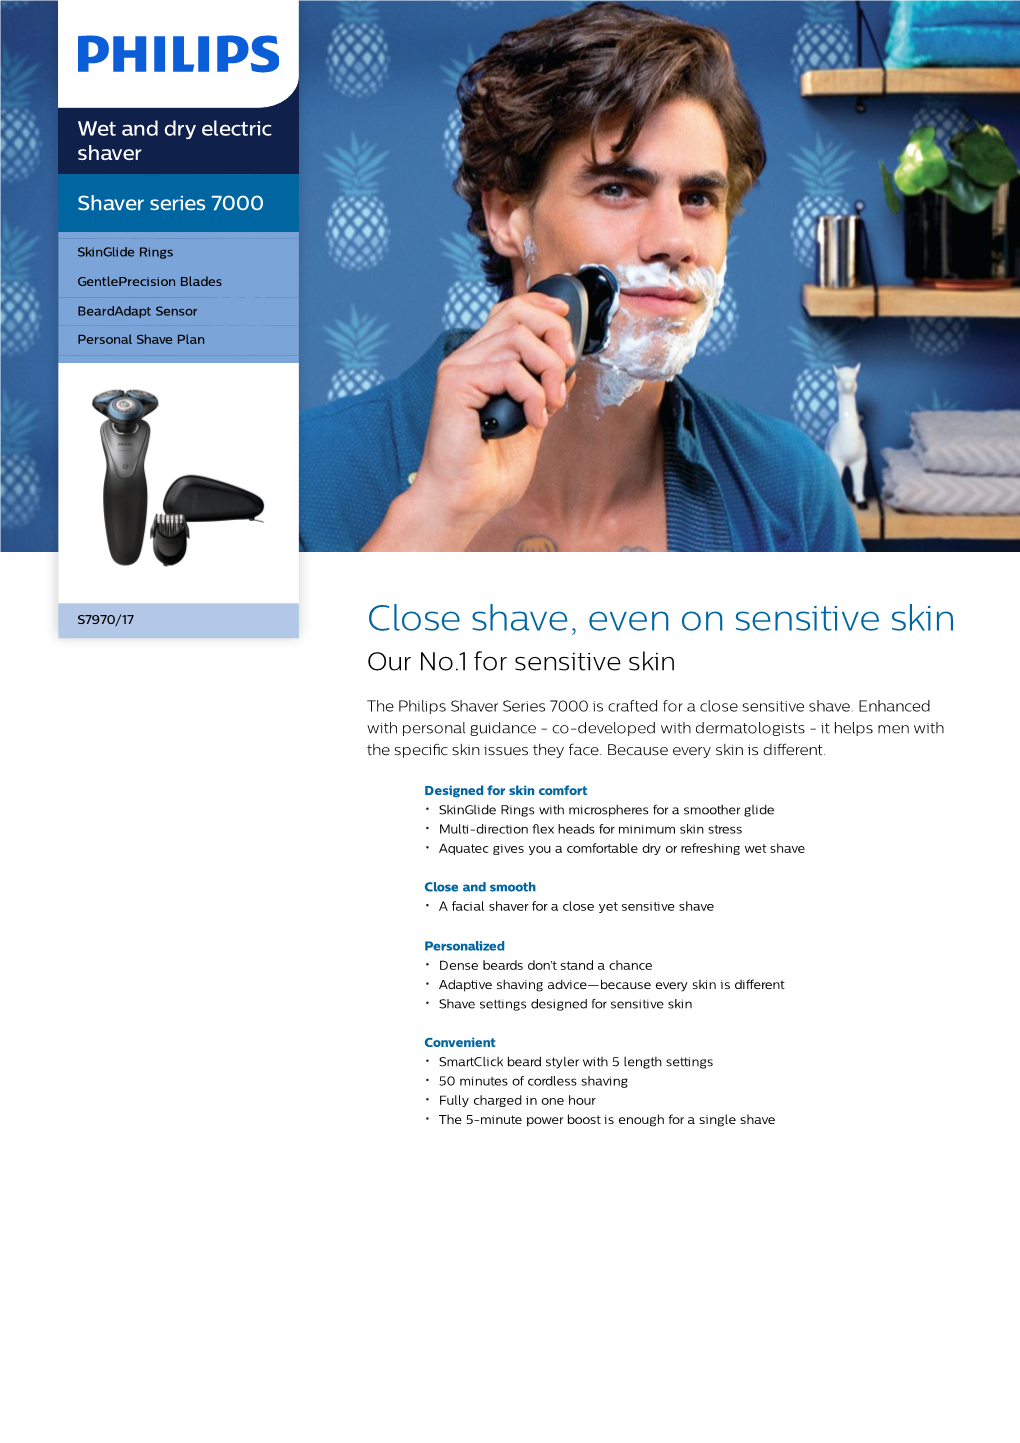 S7970/17 Philips Wet and Dry Electric Shaver